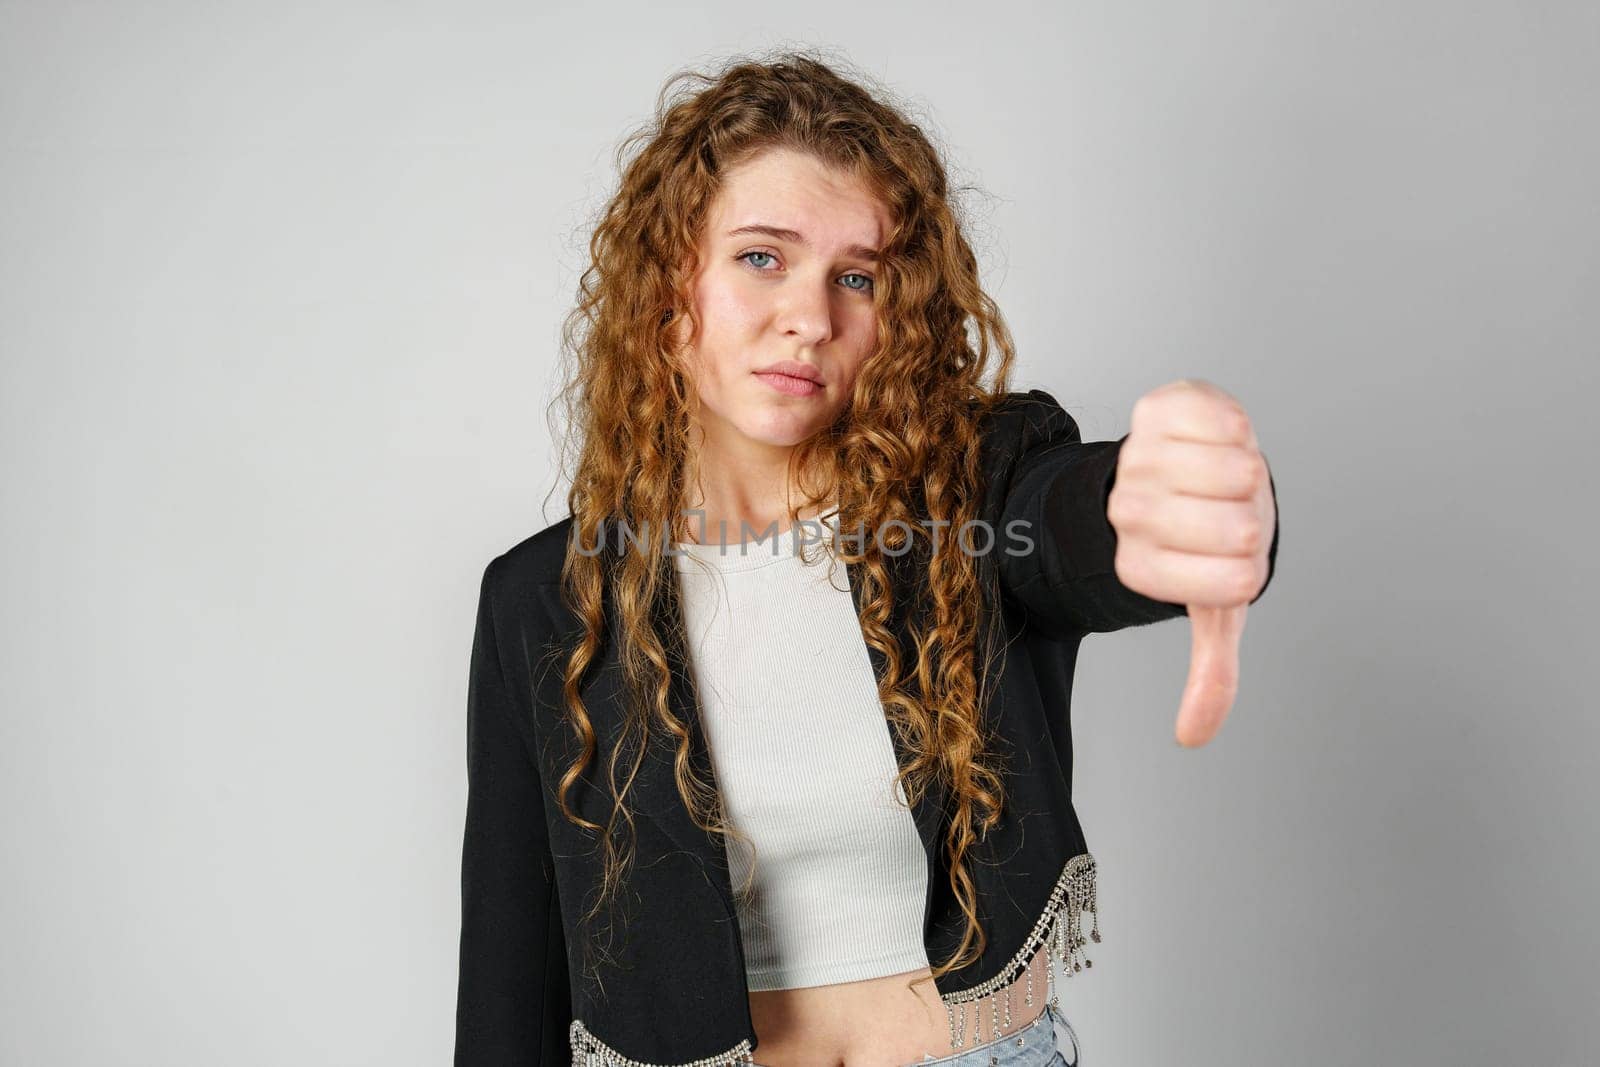 Woman With Curly Hair Giving a Thumbs Down by Fabrikasimf